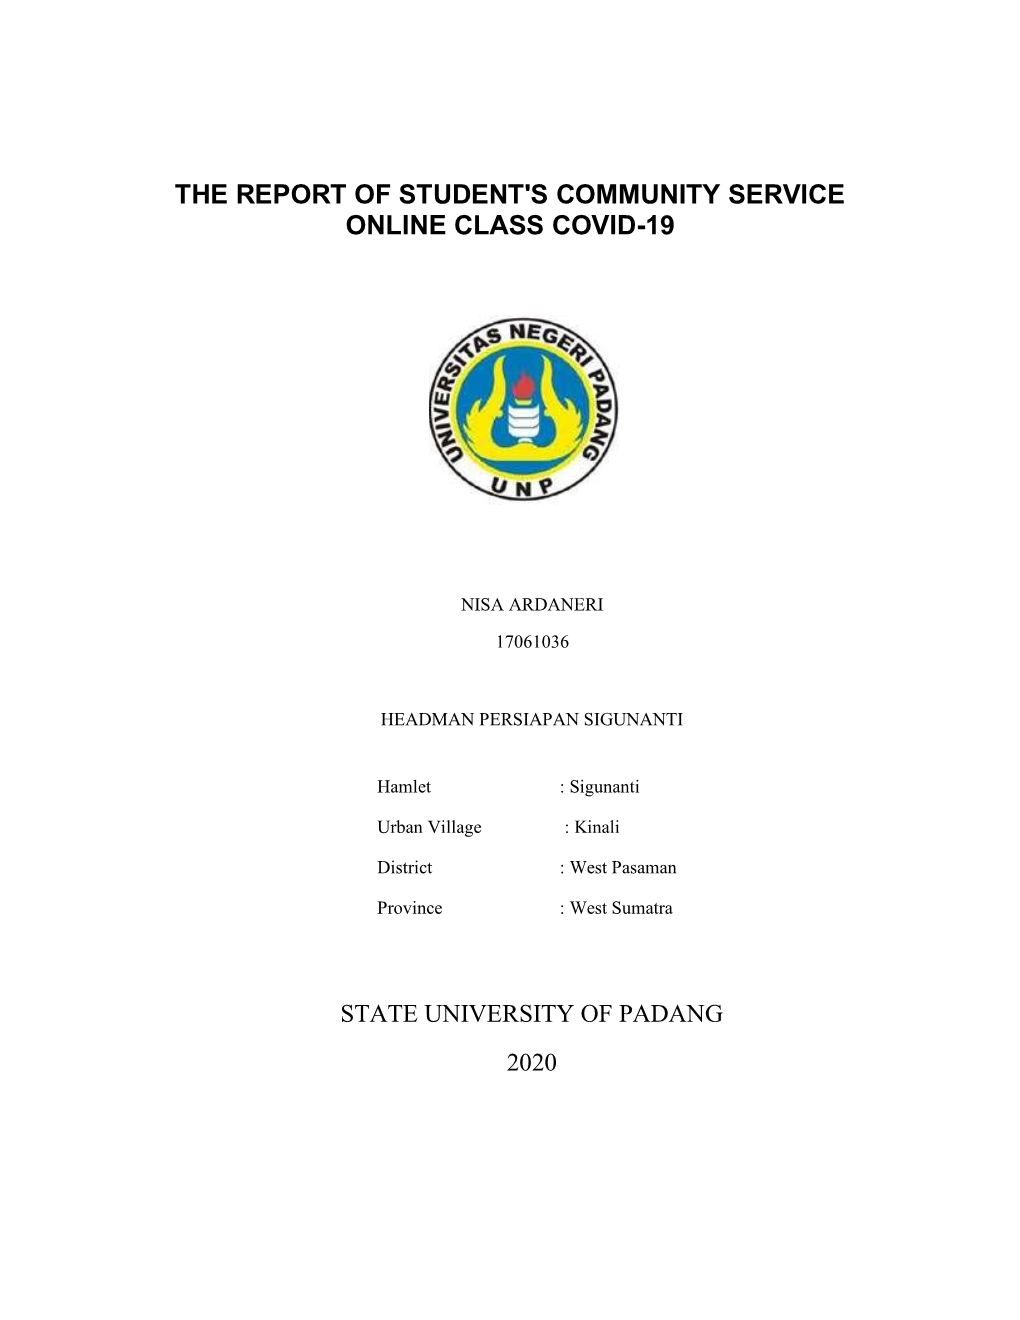 The Report of Student's Community Service Online Class Covid-19